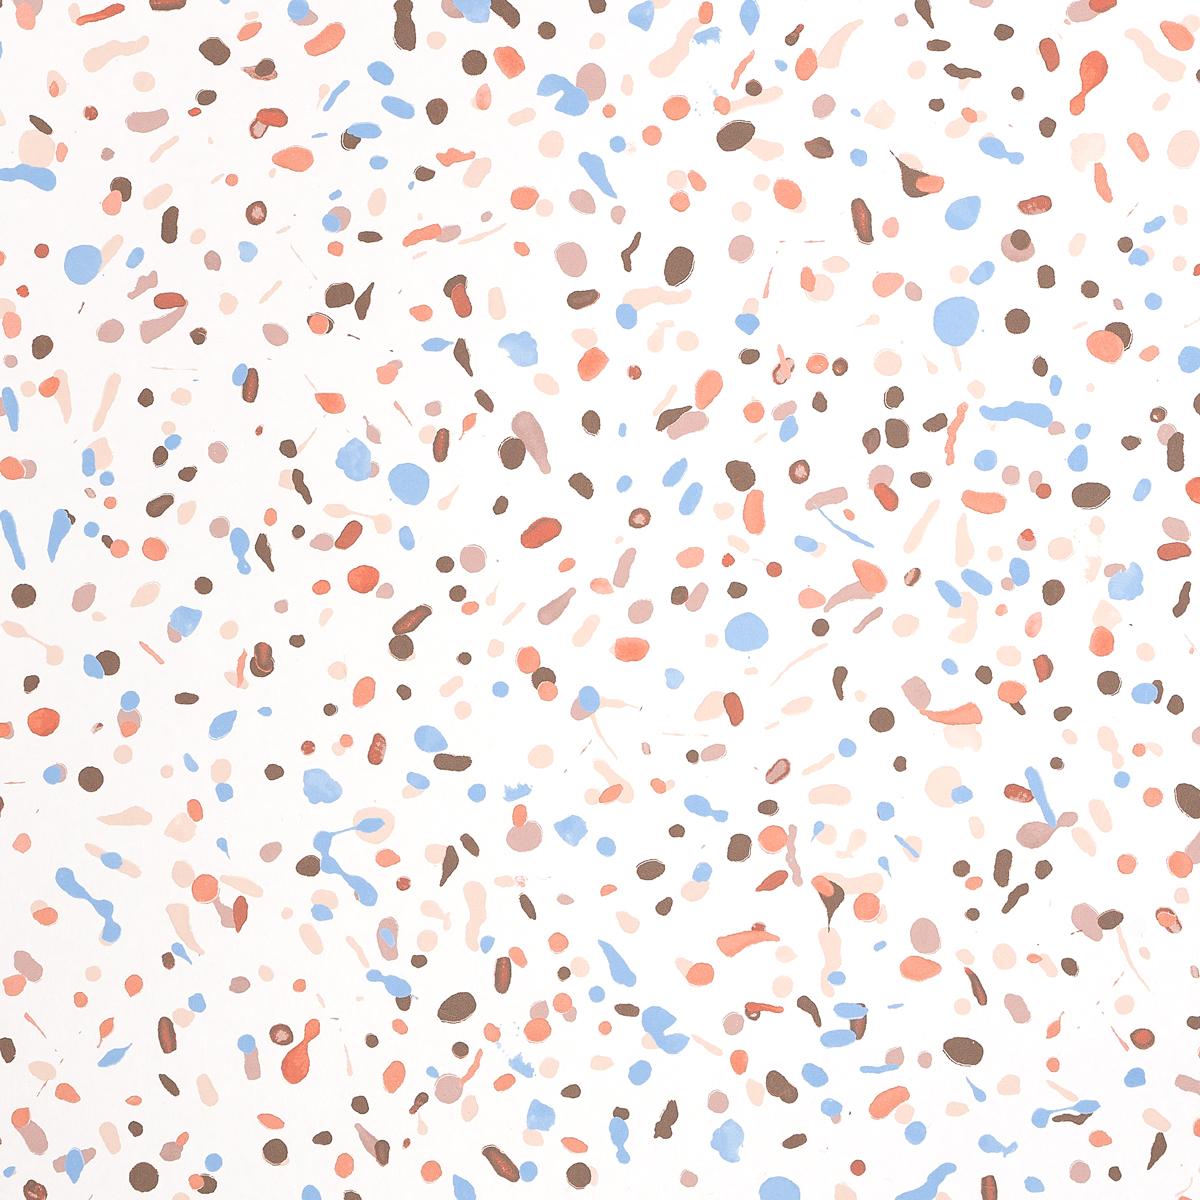 Red and blue splatters of paint on a white surface.